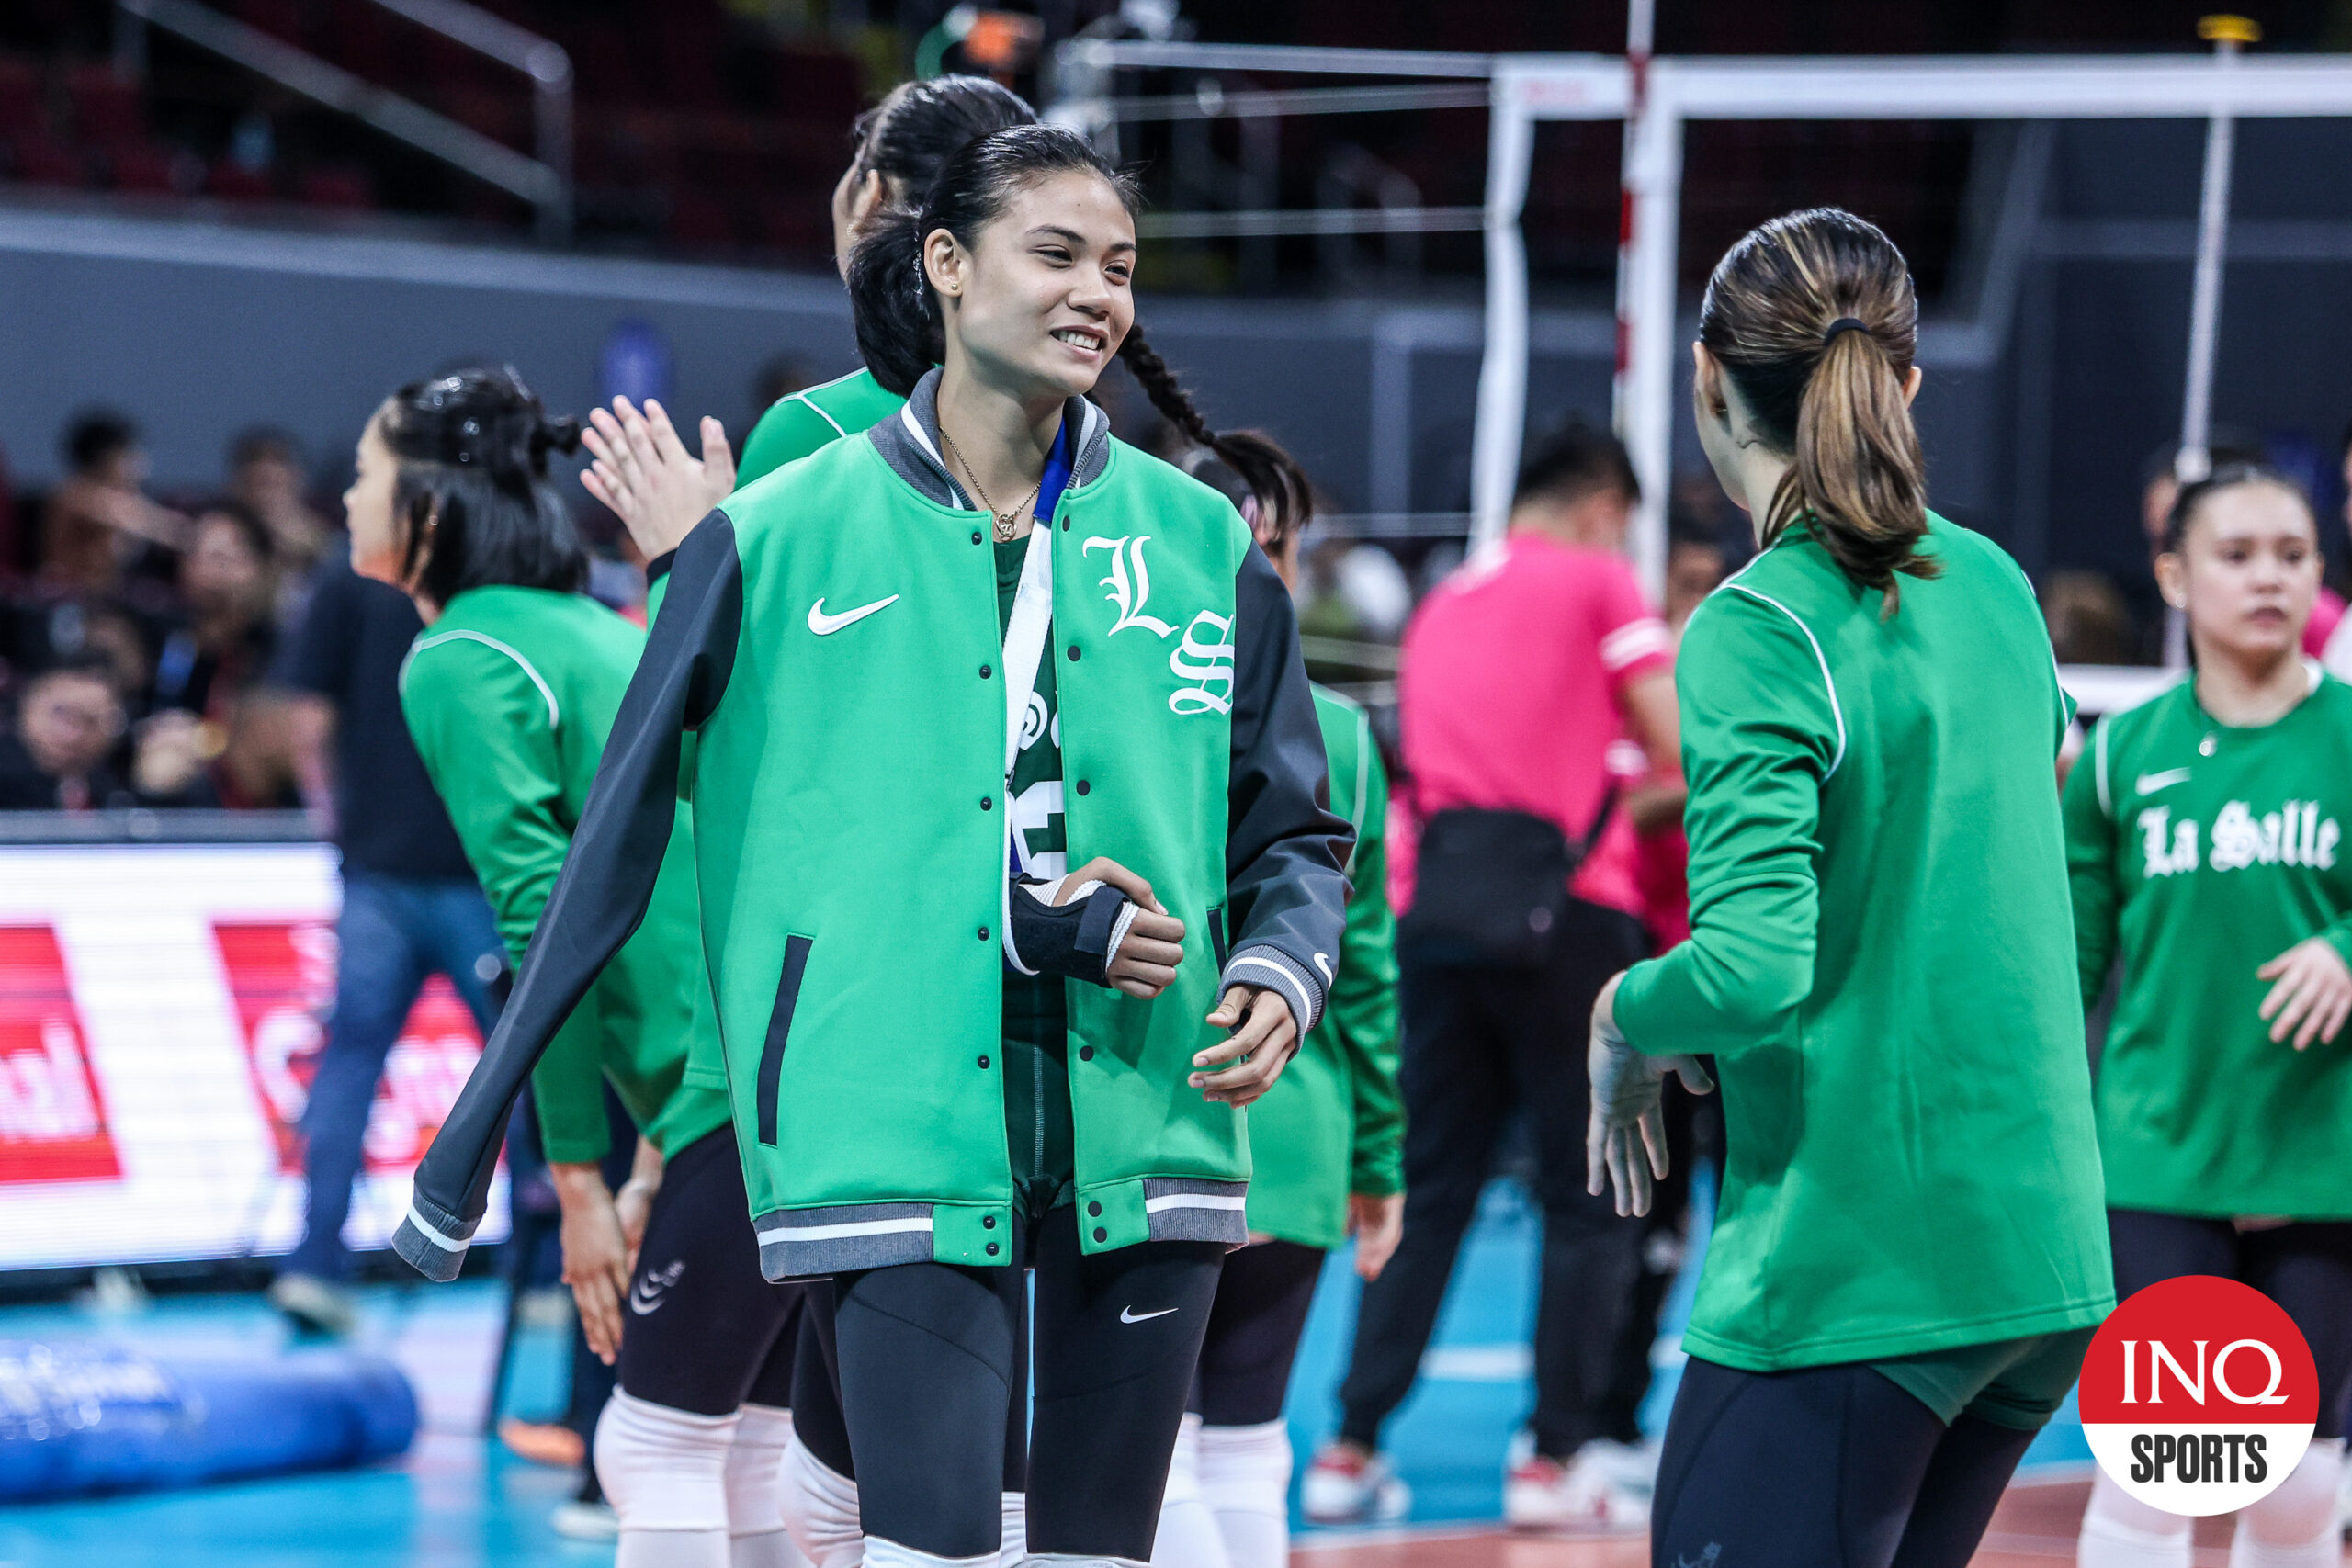 La Salle Lady Spikers star Angel Canino